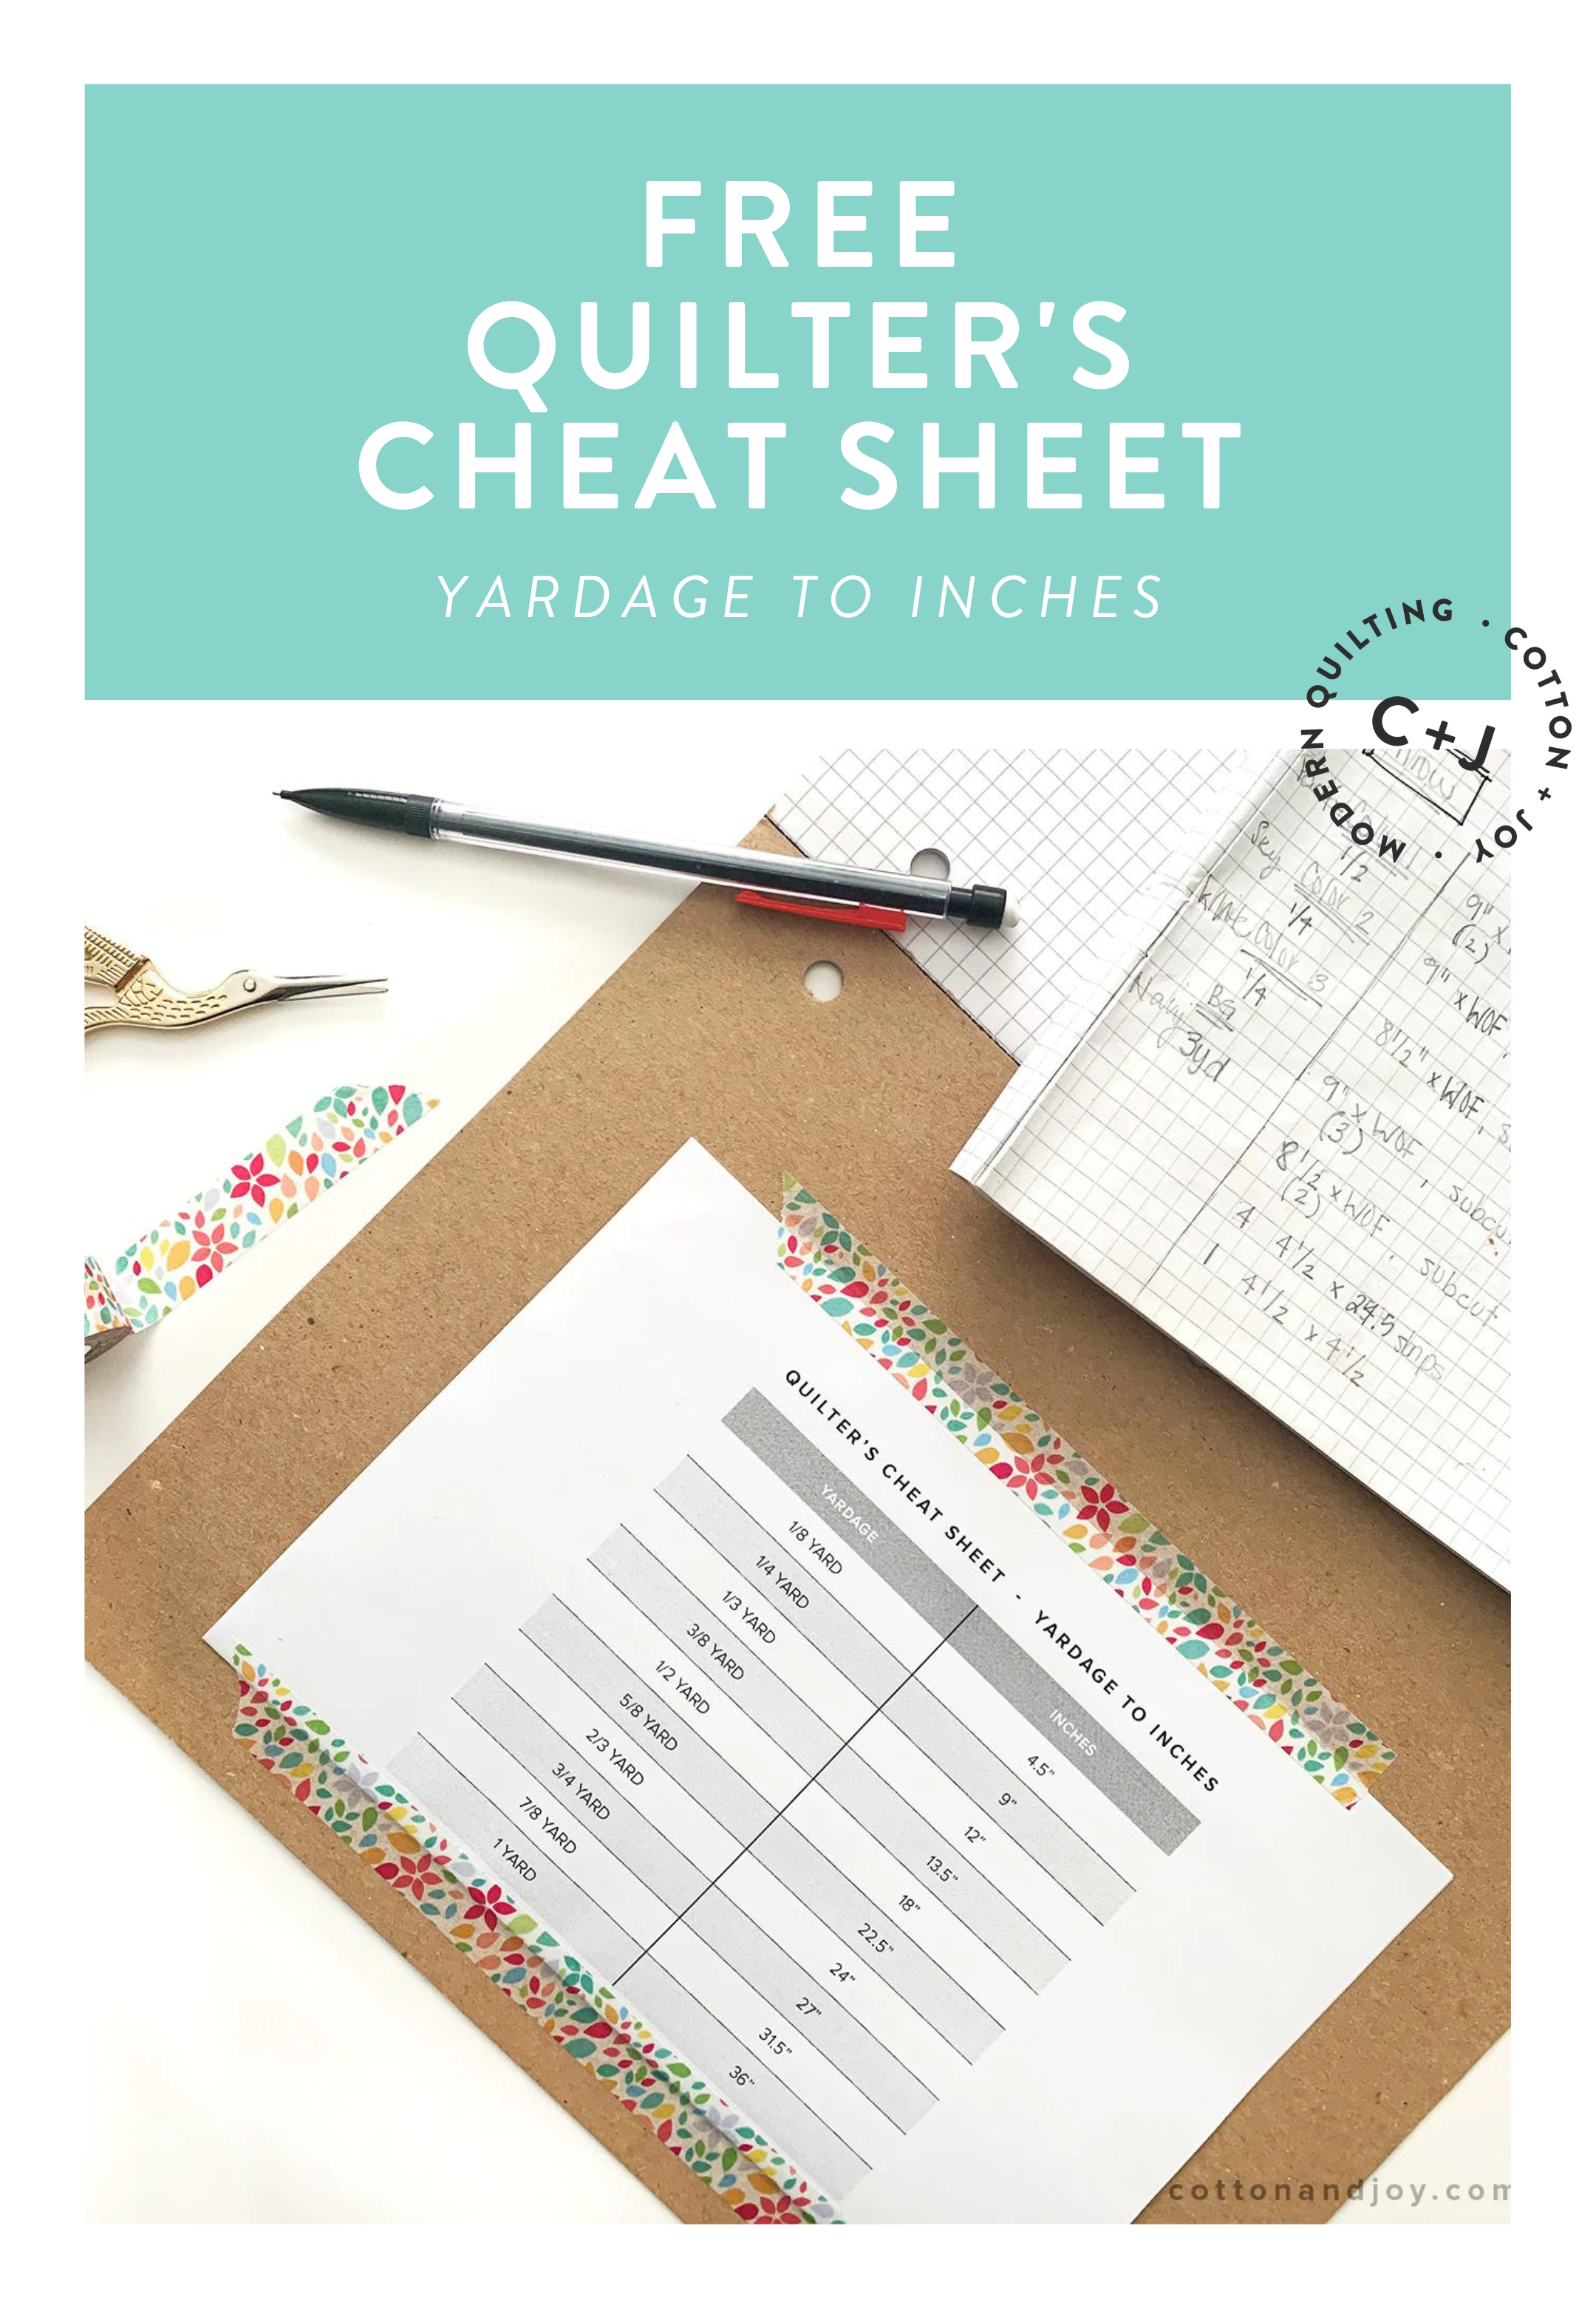 Grab this FREE quilting cheat sheet from Cotton and Joy for popular quilting measurements right at your fingertips